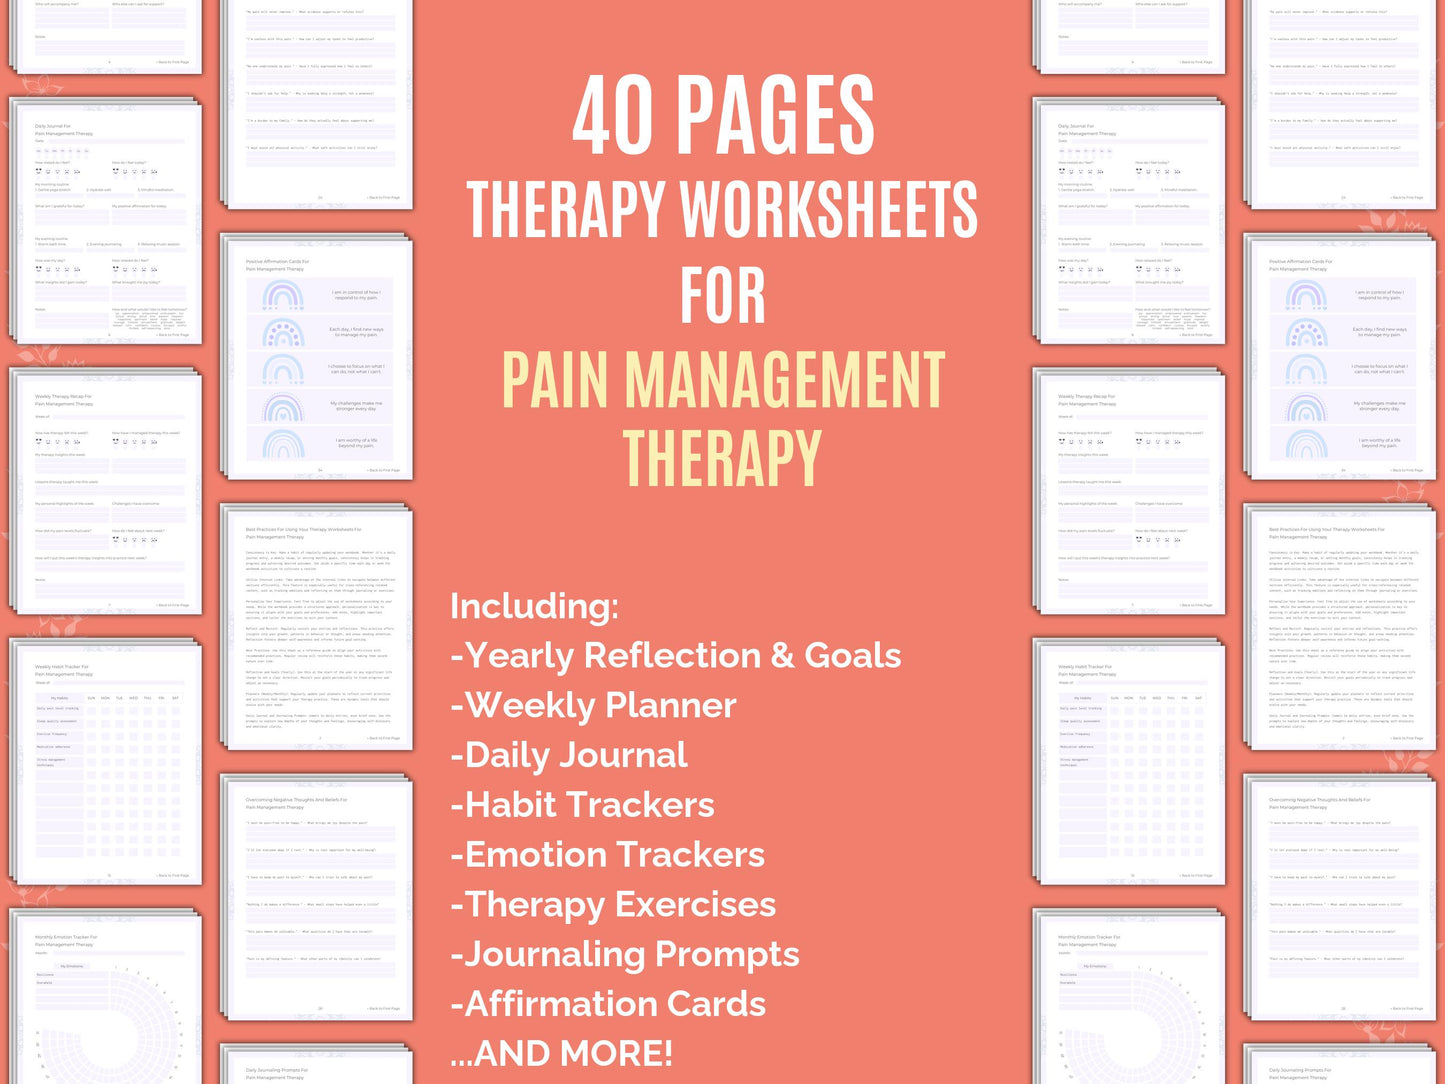 Pain Tools, Pain Planners, Pain Therapy, Management, Pain Journaling, Pain Notes, Pain Workbooks, Pain Templates, Pain Counseling, Pain Journals, Pain Resources, Pain Cheat Sheet, Pain Goal Setting